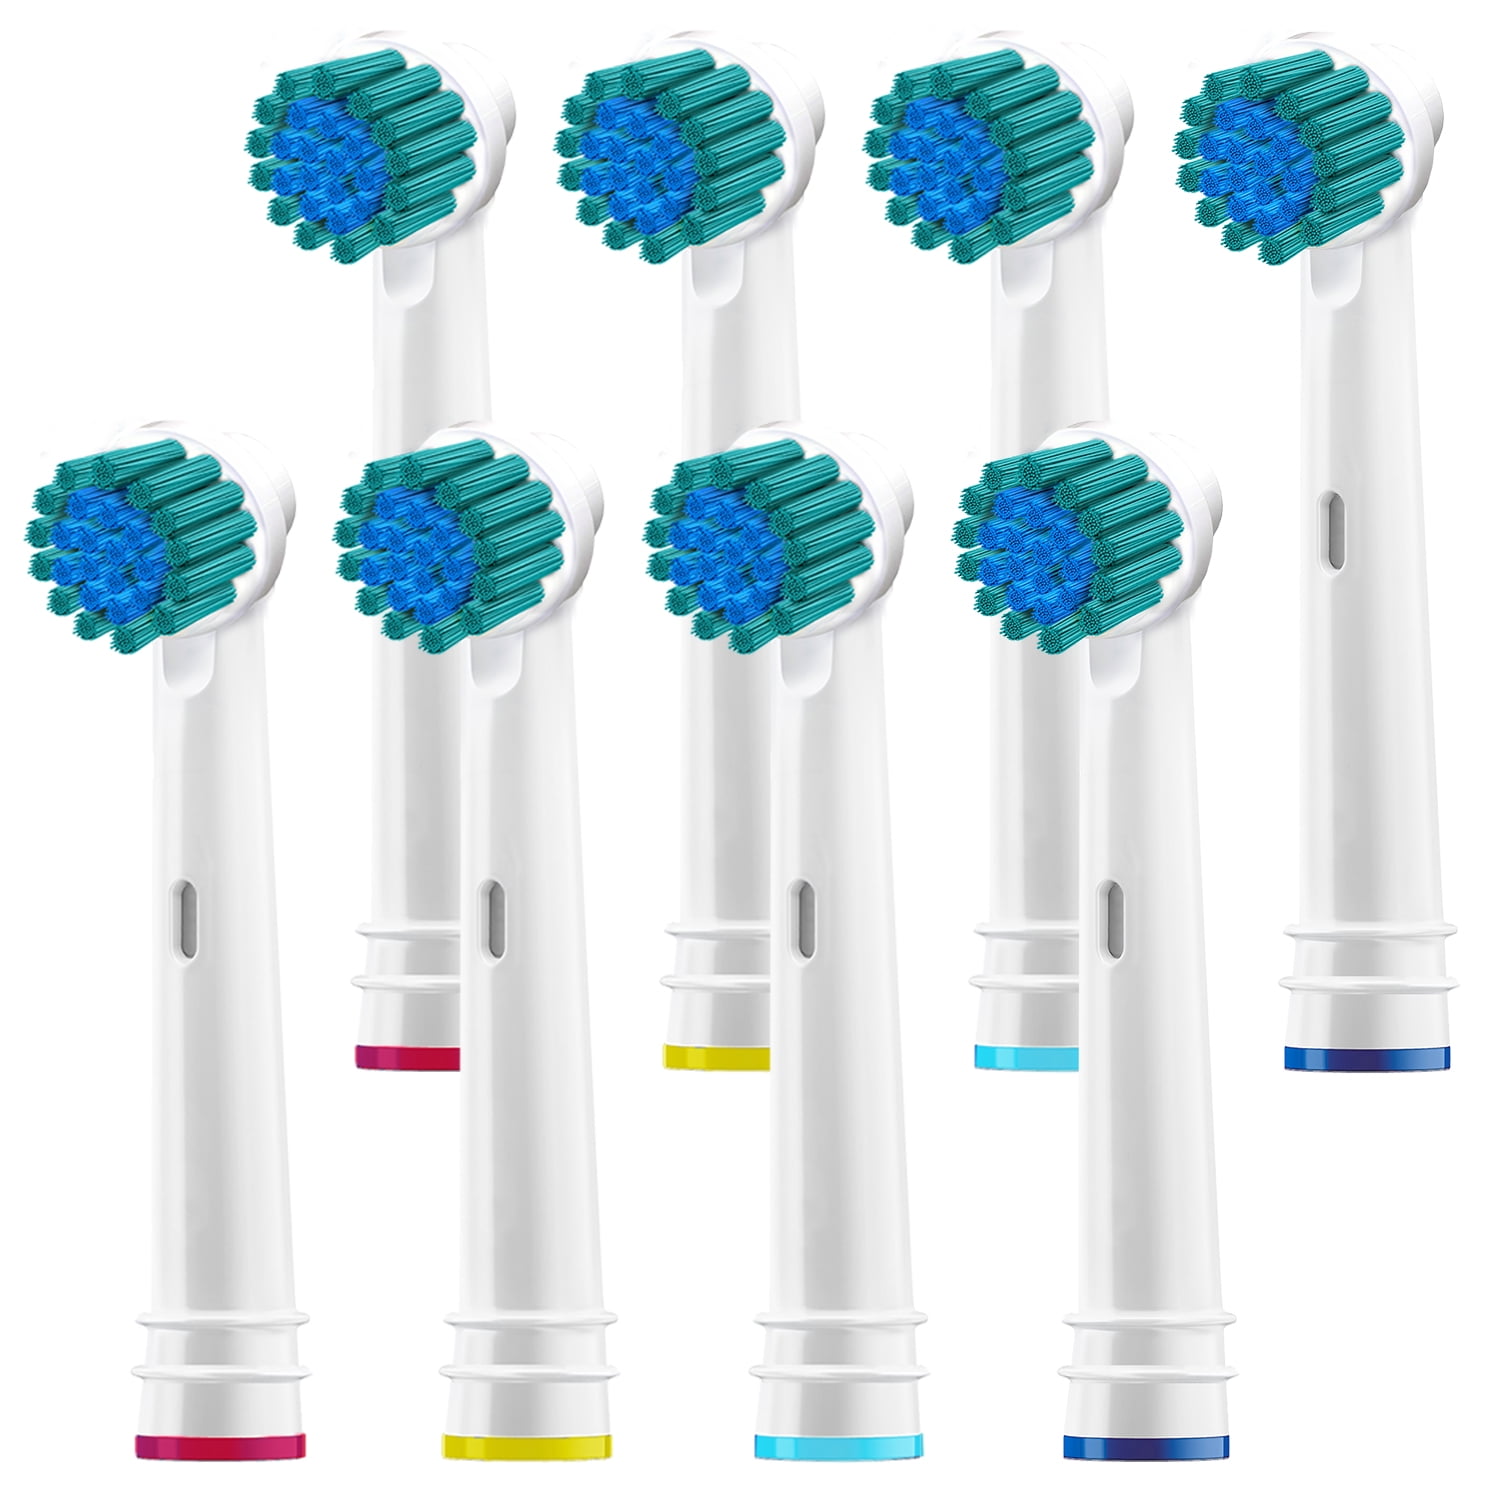 Replacement Brush Heads Compatible With Oral Sensitive Gum Care Electric Toothbrush Heads Pk of 8 Generic Sensitive Clean Fits Oral-b Braun 7000, Pro 1000, 9600, 500, 3000, 8000 - Walmart.com